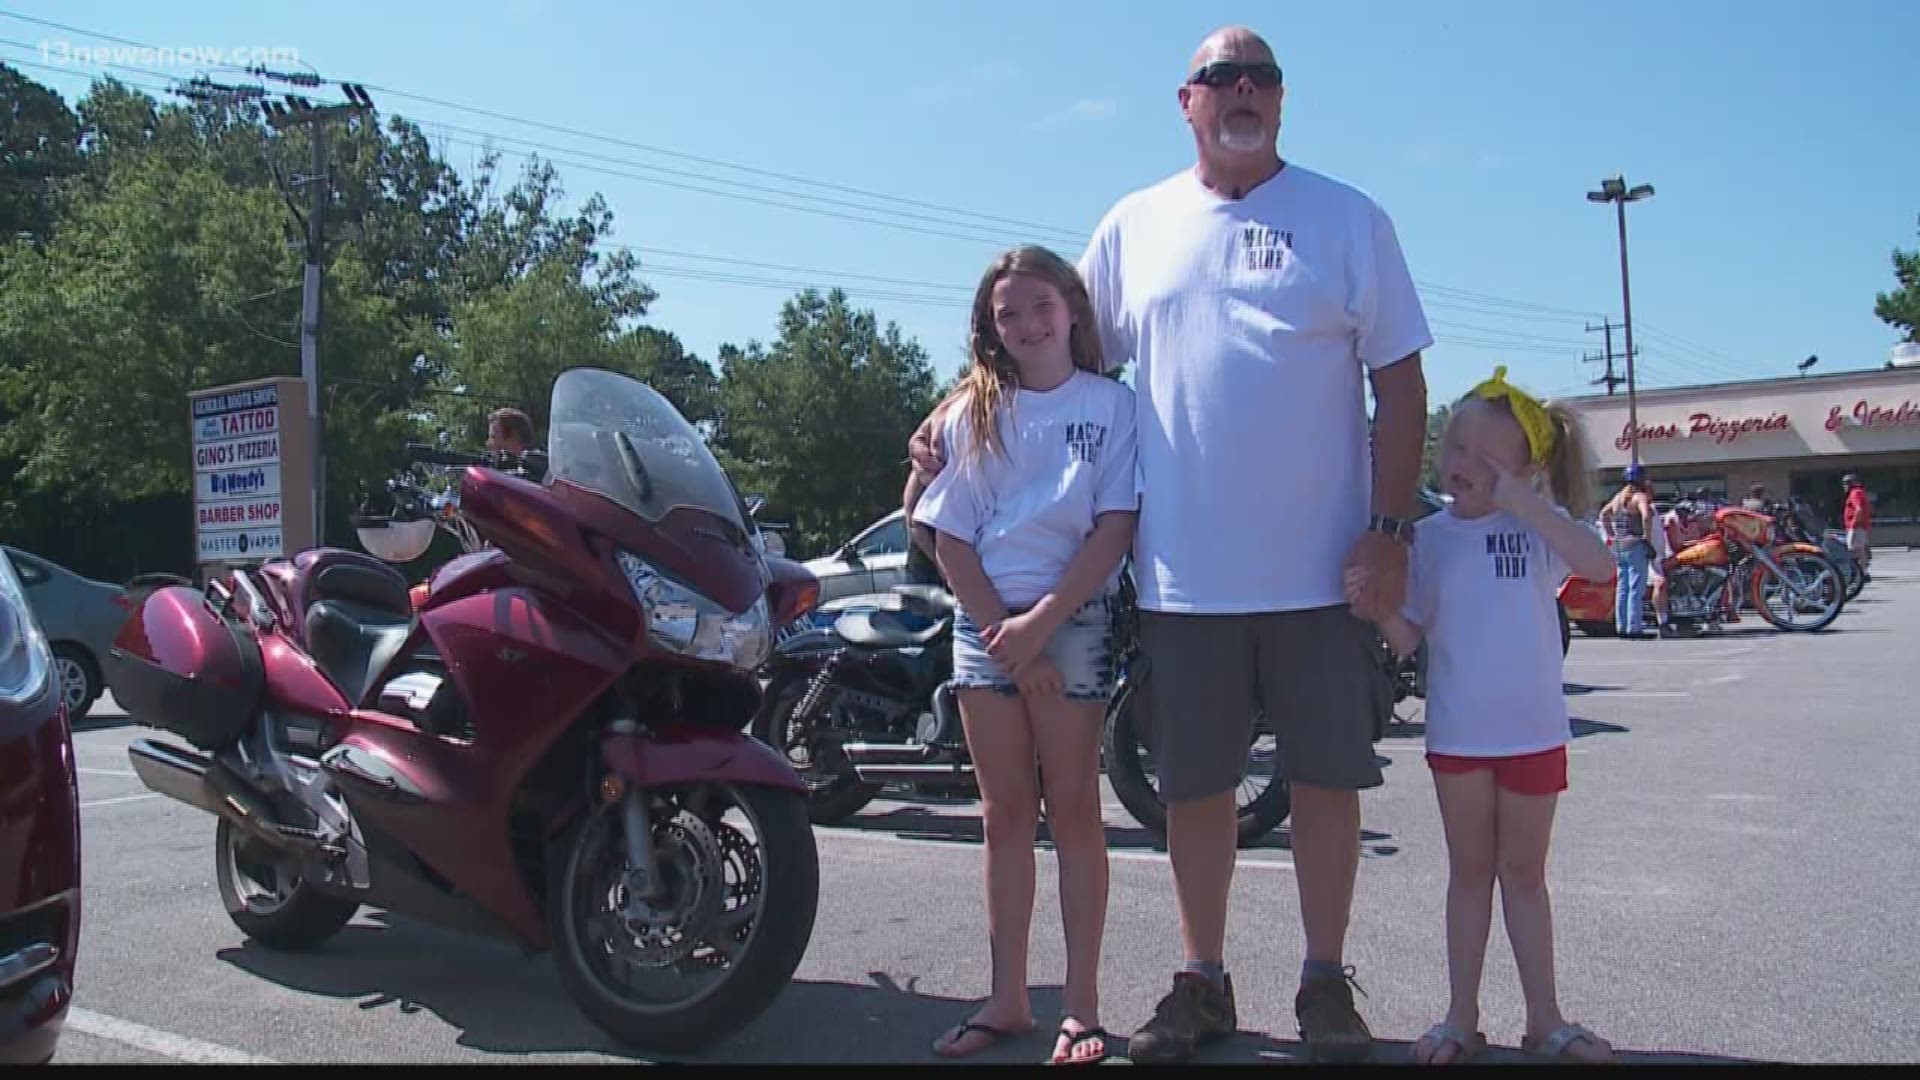 A motorcycle parade in Virginia Beach over the weekend raised money for the Tidewater Autism Society.